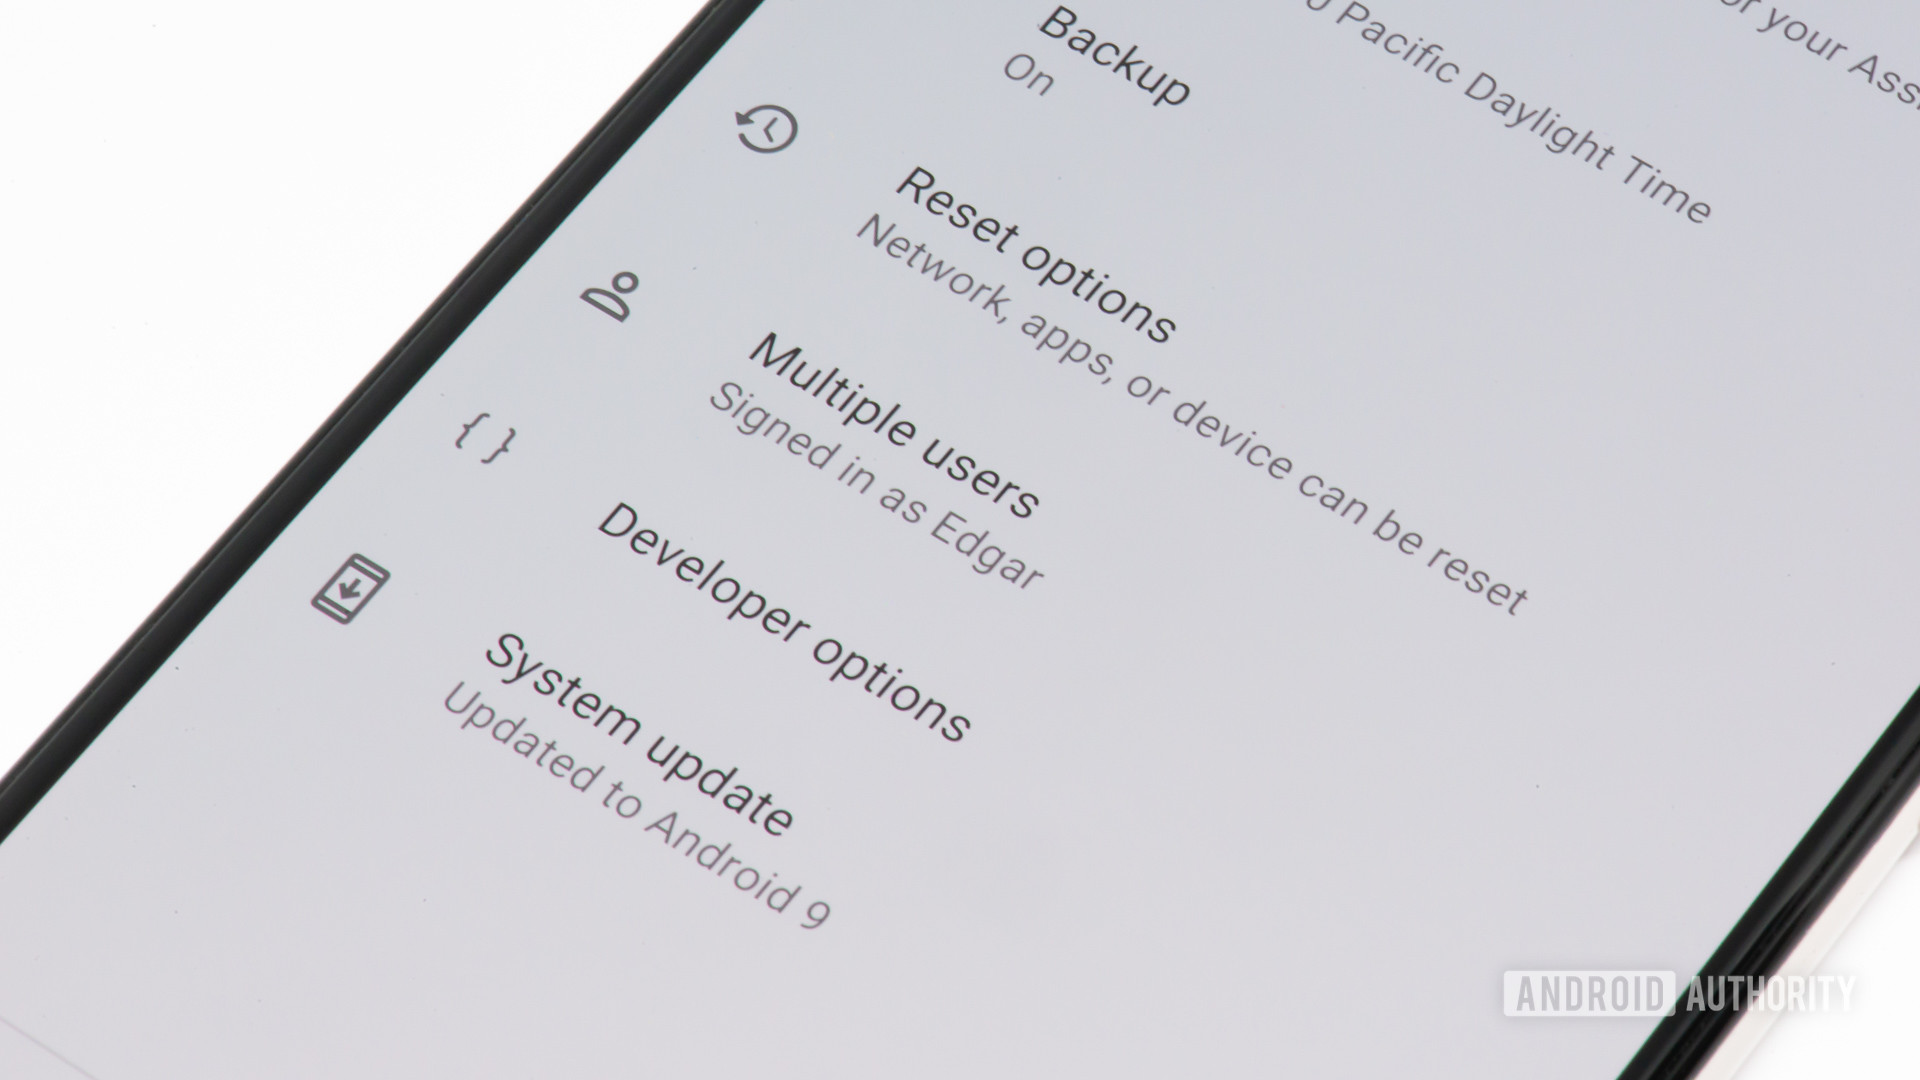 How to enable developer options on Android - image of developer options settings